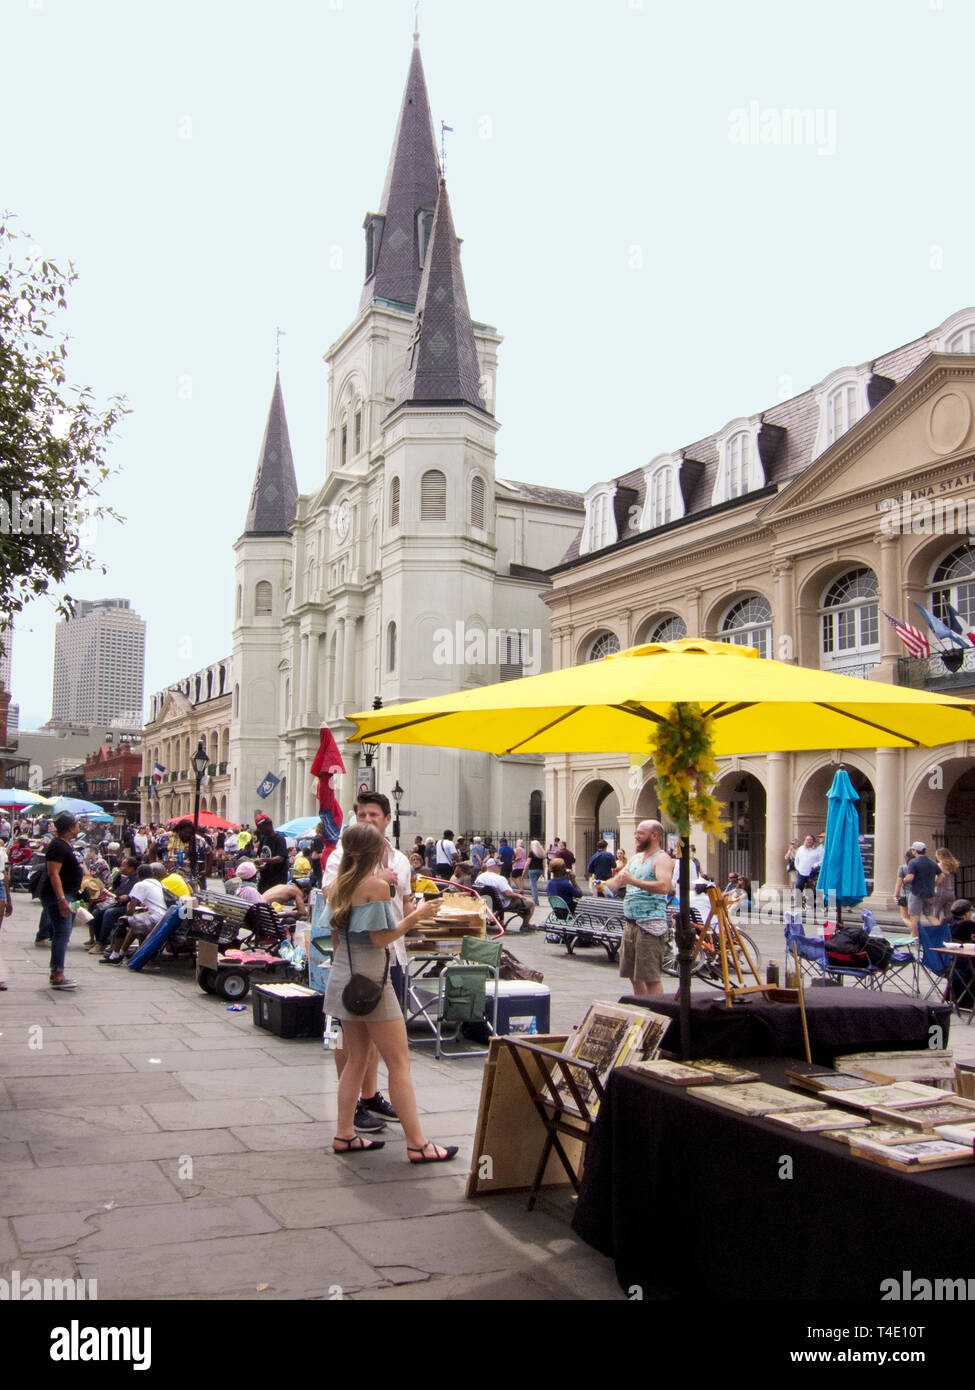 Local artists selling their wares in front of St. Lois Cathedral.  New Orleans, LA. Stock Photo